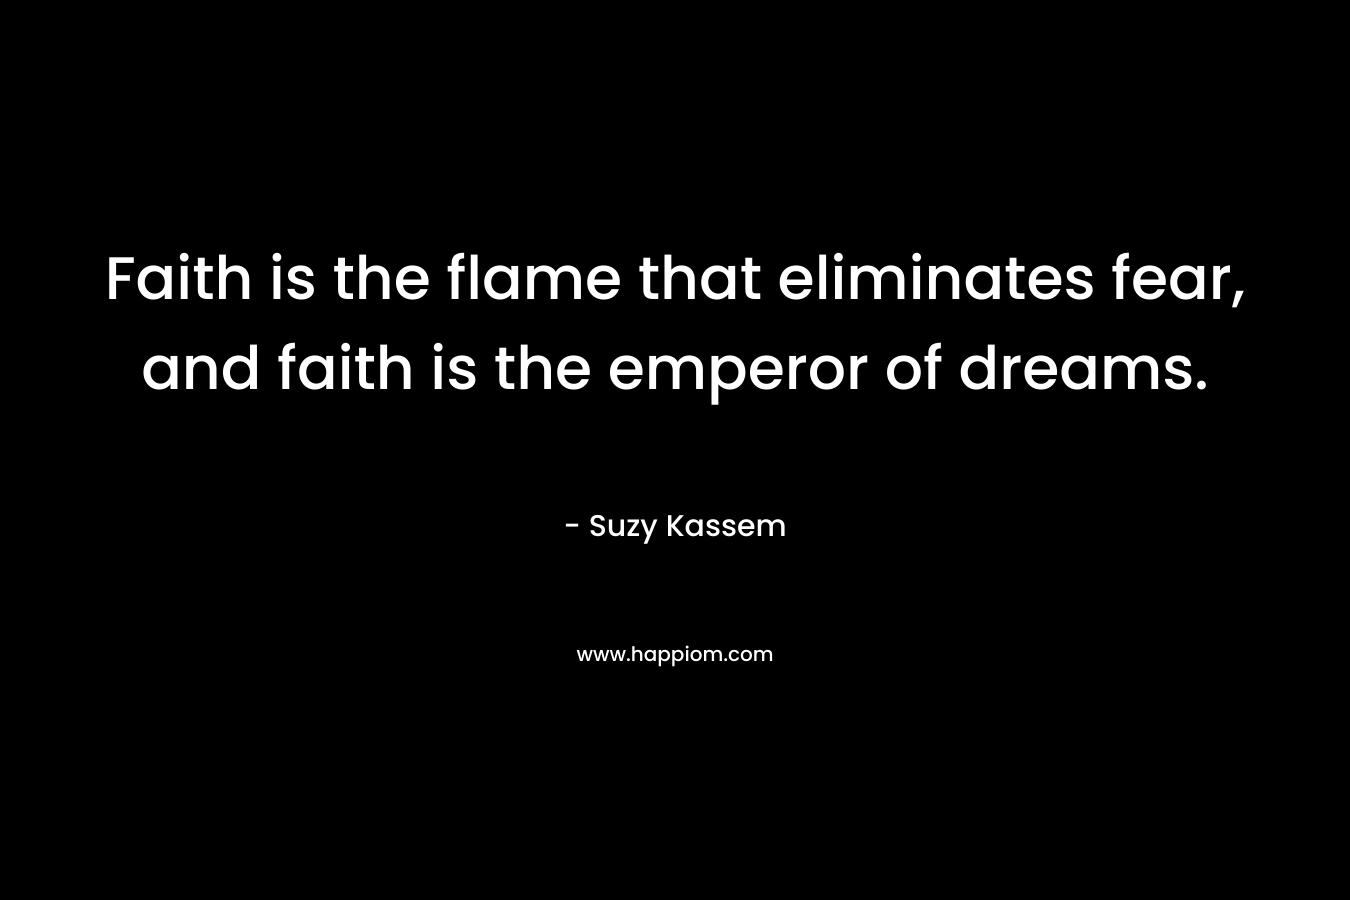 Faith is the flame that eliminates fear, and faith is the emperor of dreams. – Suzy Kassem